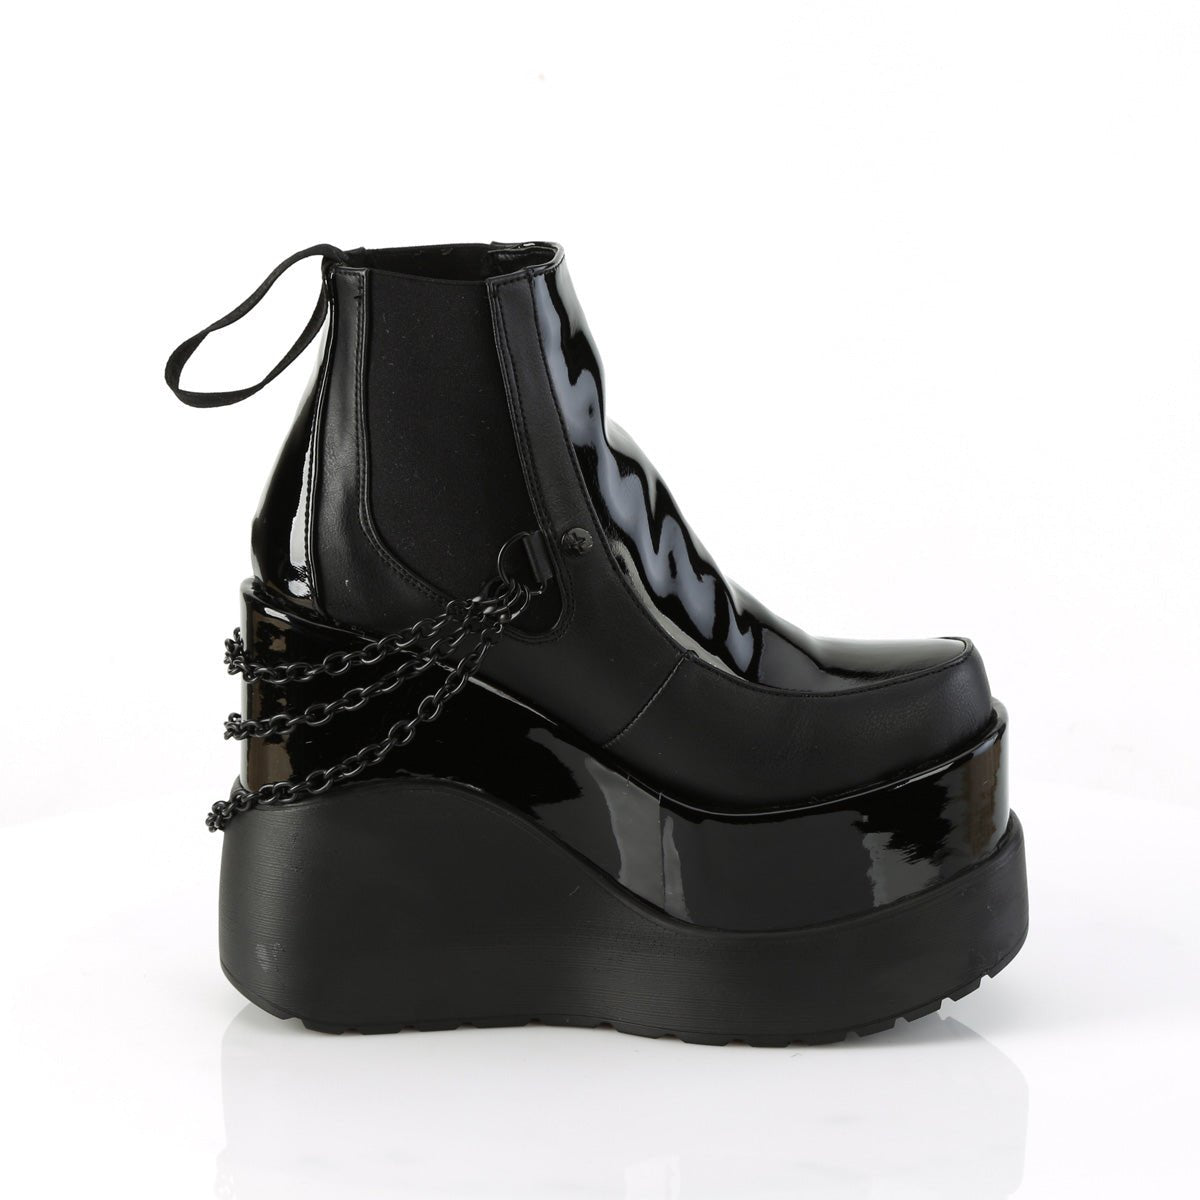 Too Fast | Demonia Void 50 | Black Patent Leather Women's Ankle Boots